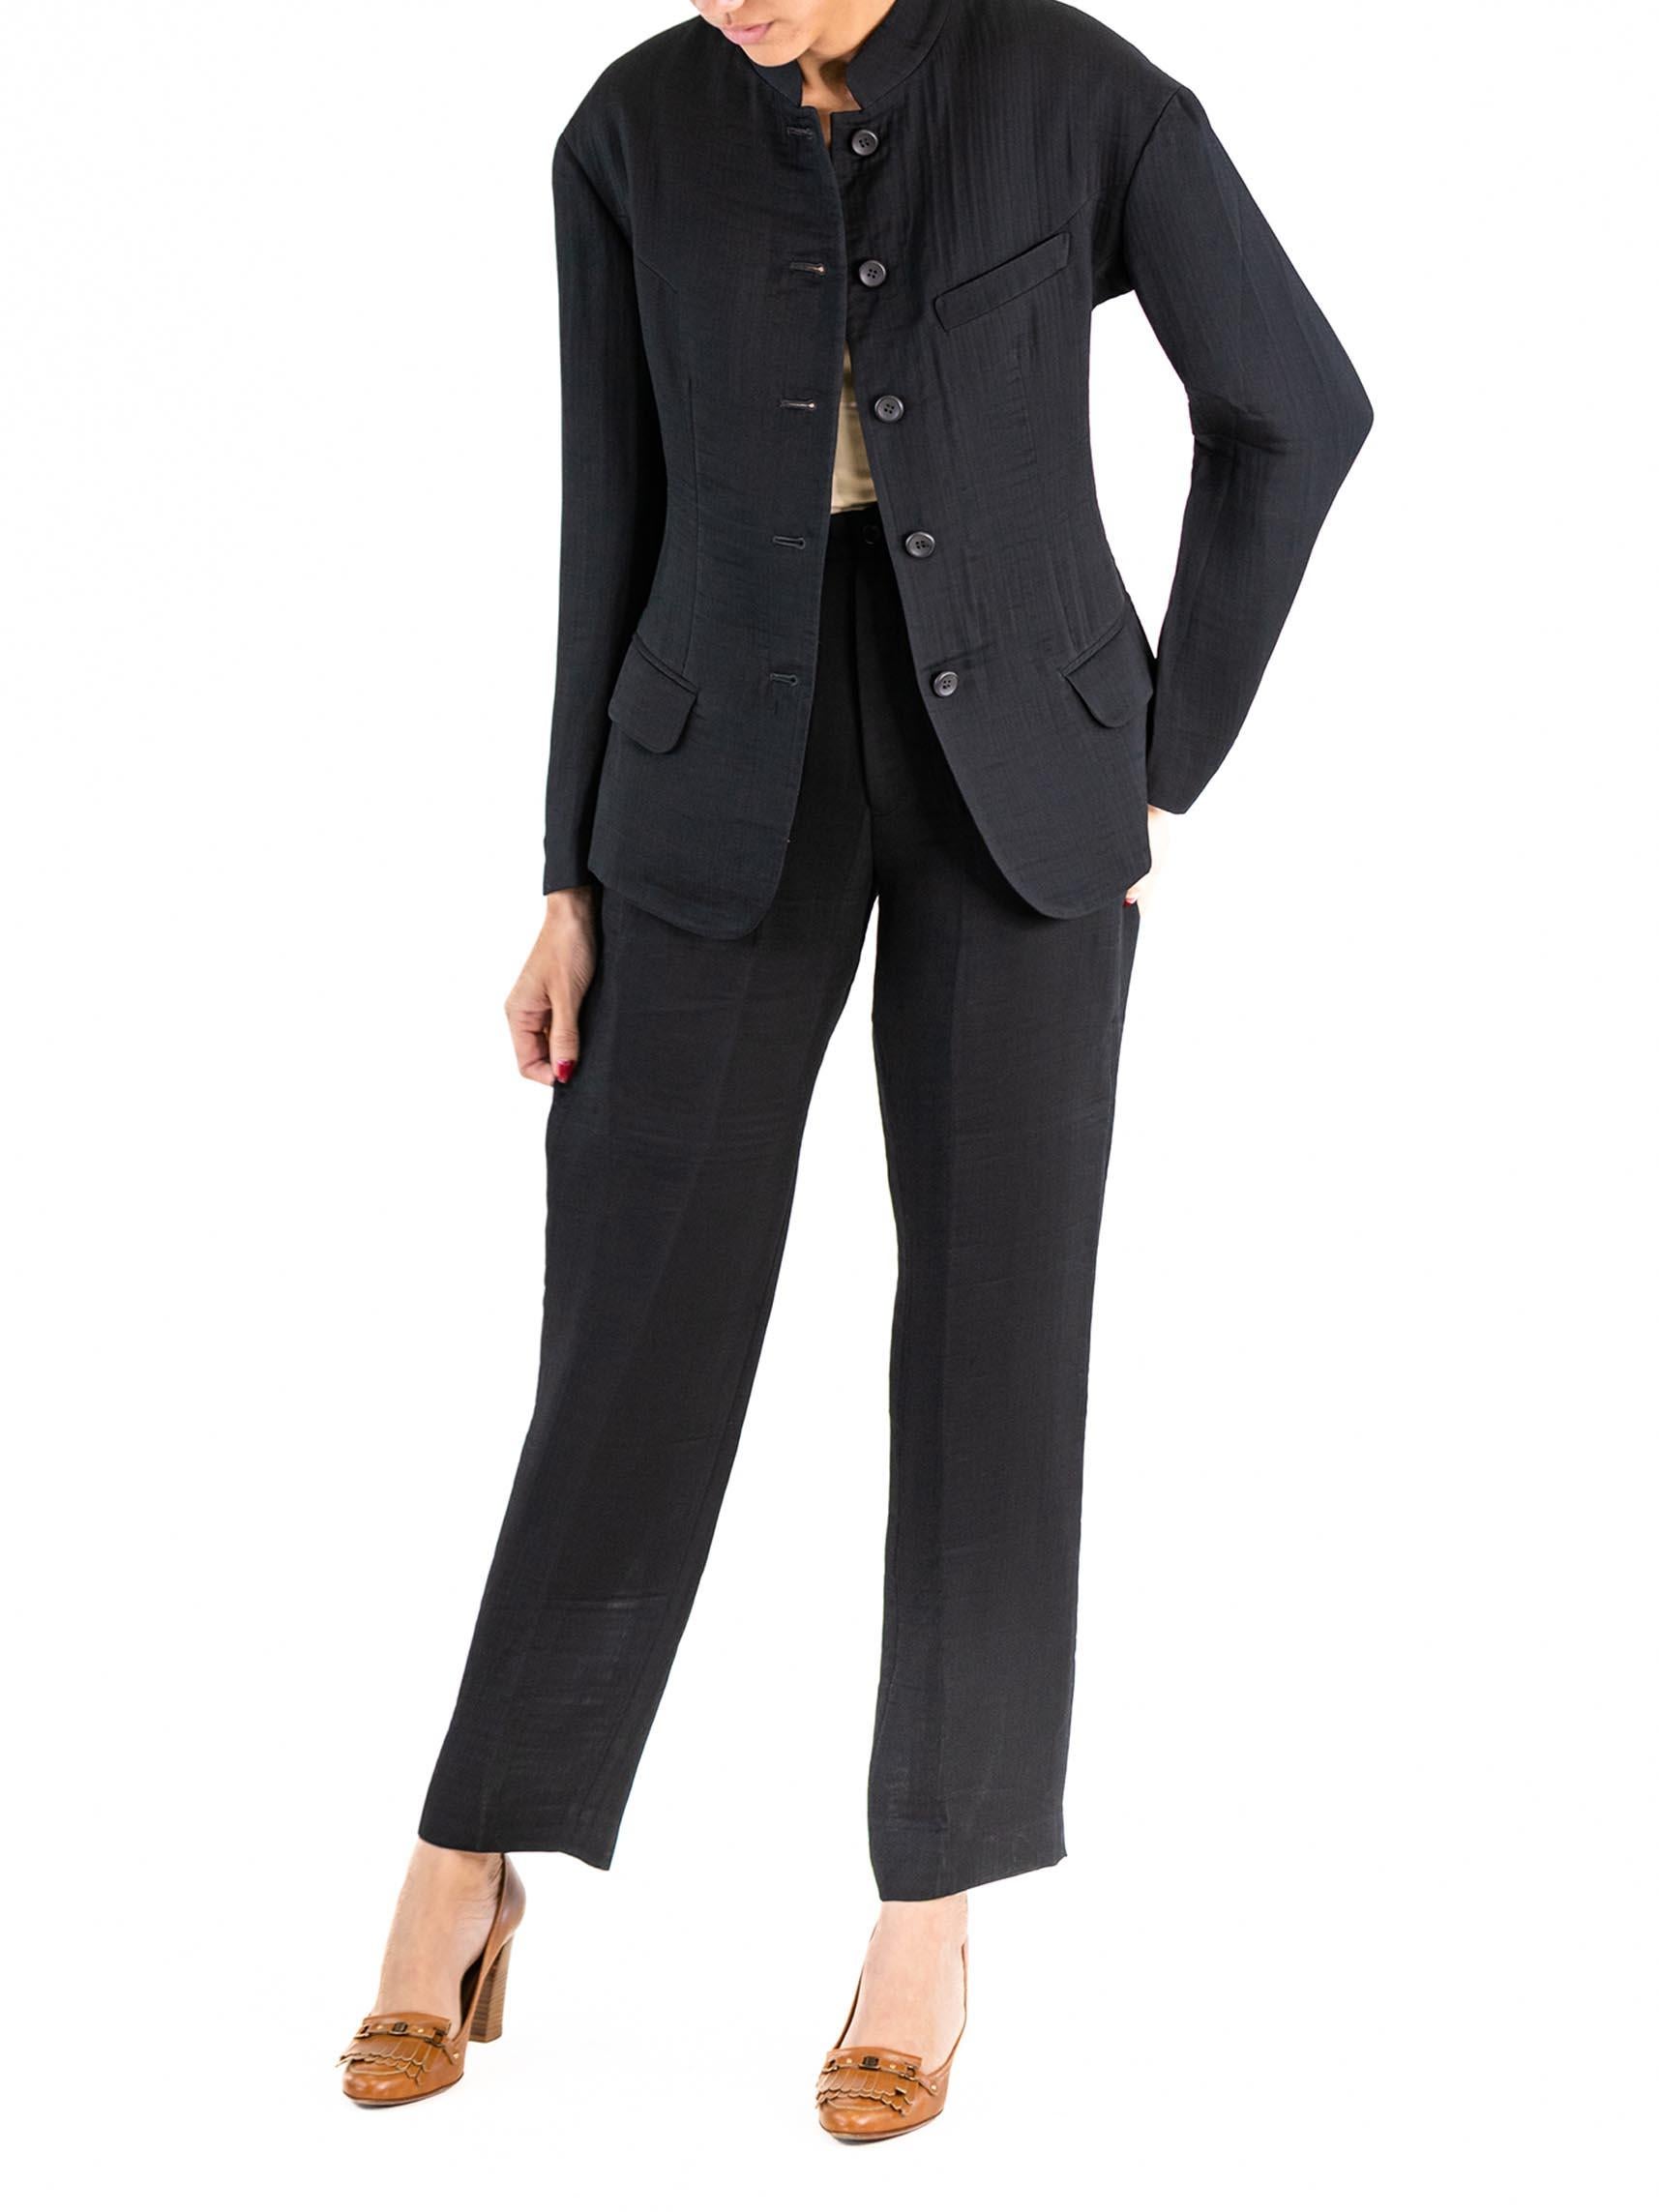 1990S ISSEY MIYAKE Black Rayon Blend Lightweight Pucker Double-Weave Pant Suit For Sale 3